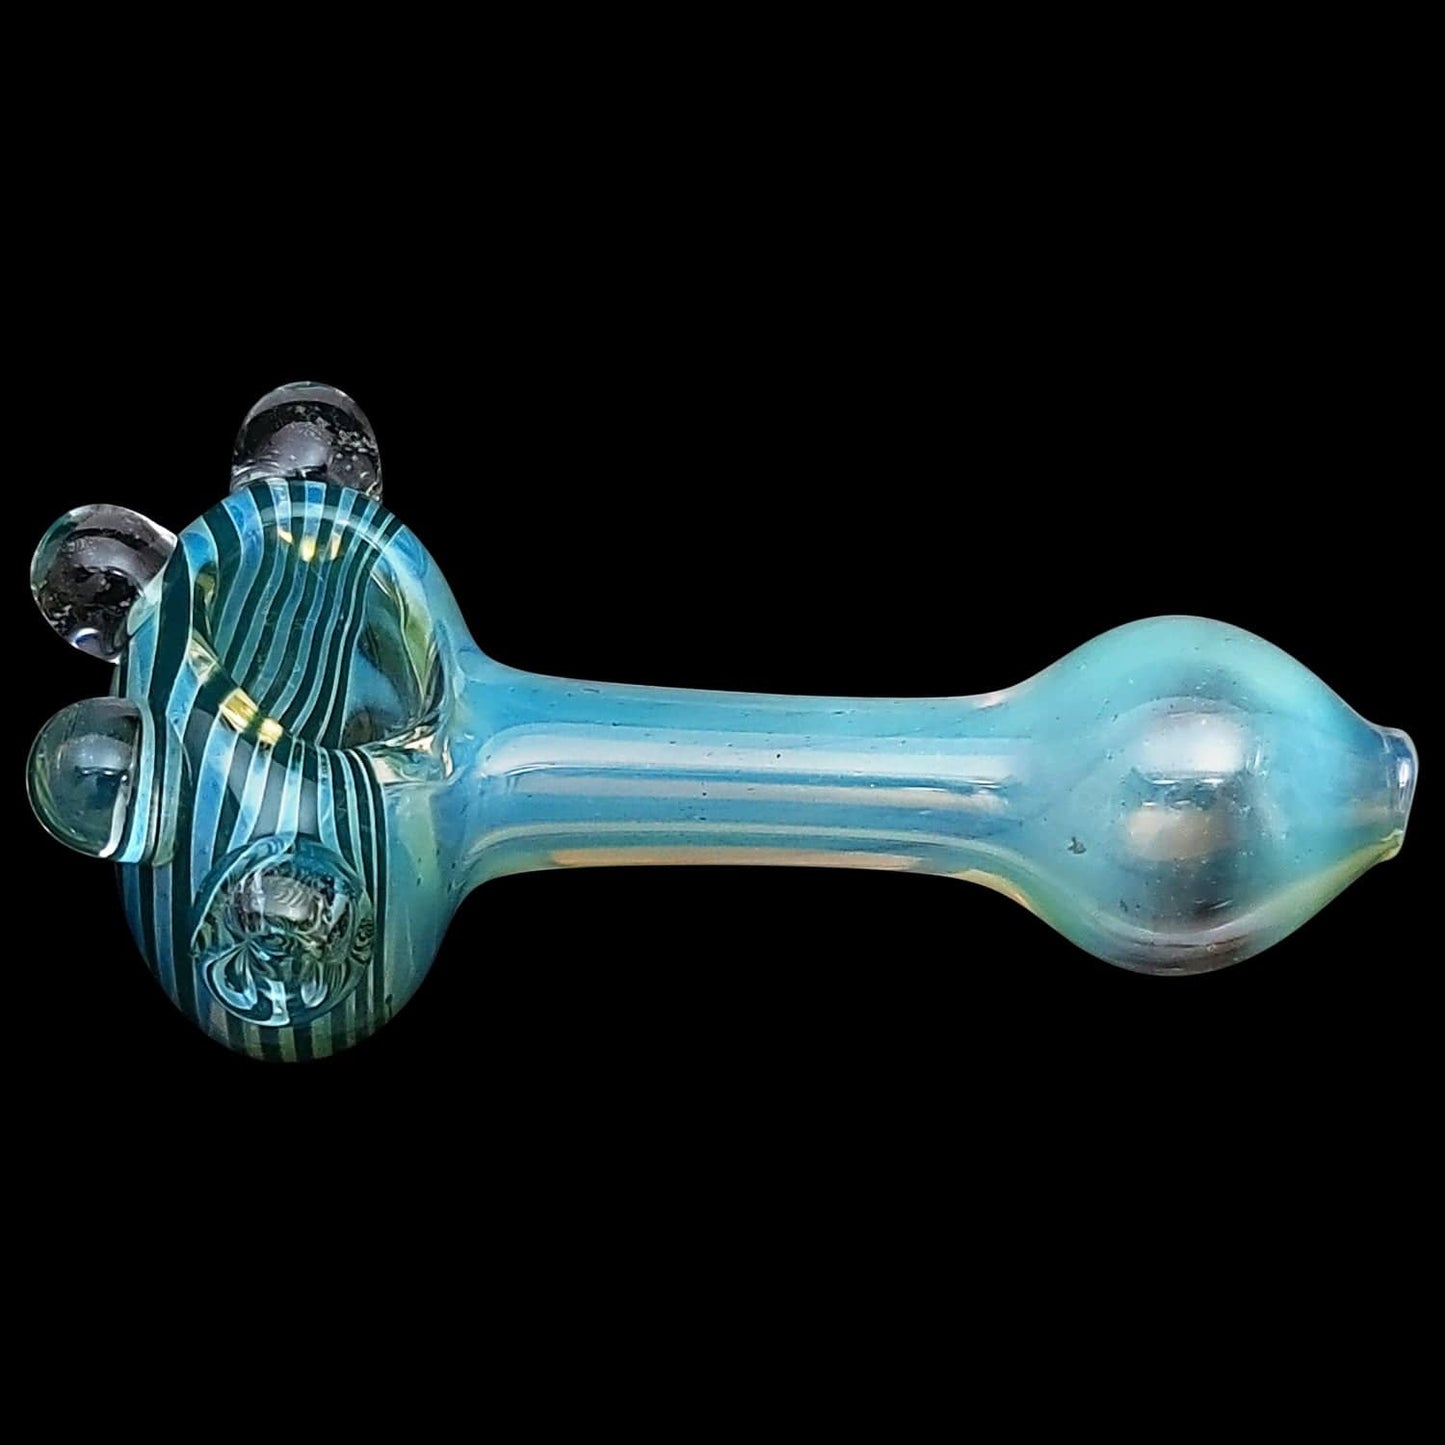 LA Pipes Hand Pipe "Spiral Marble Head" Glass Spoon Pipe